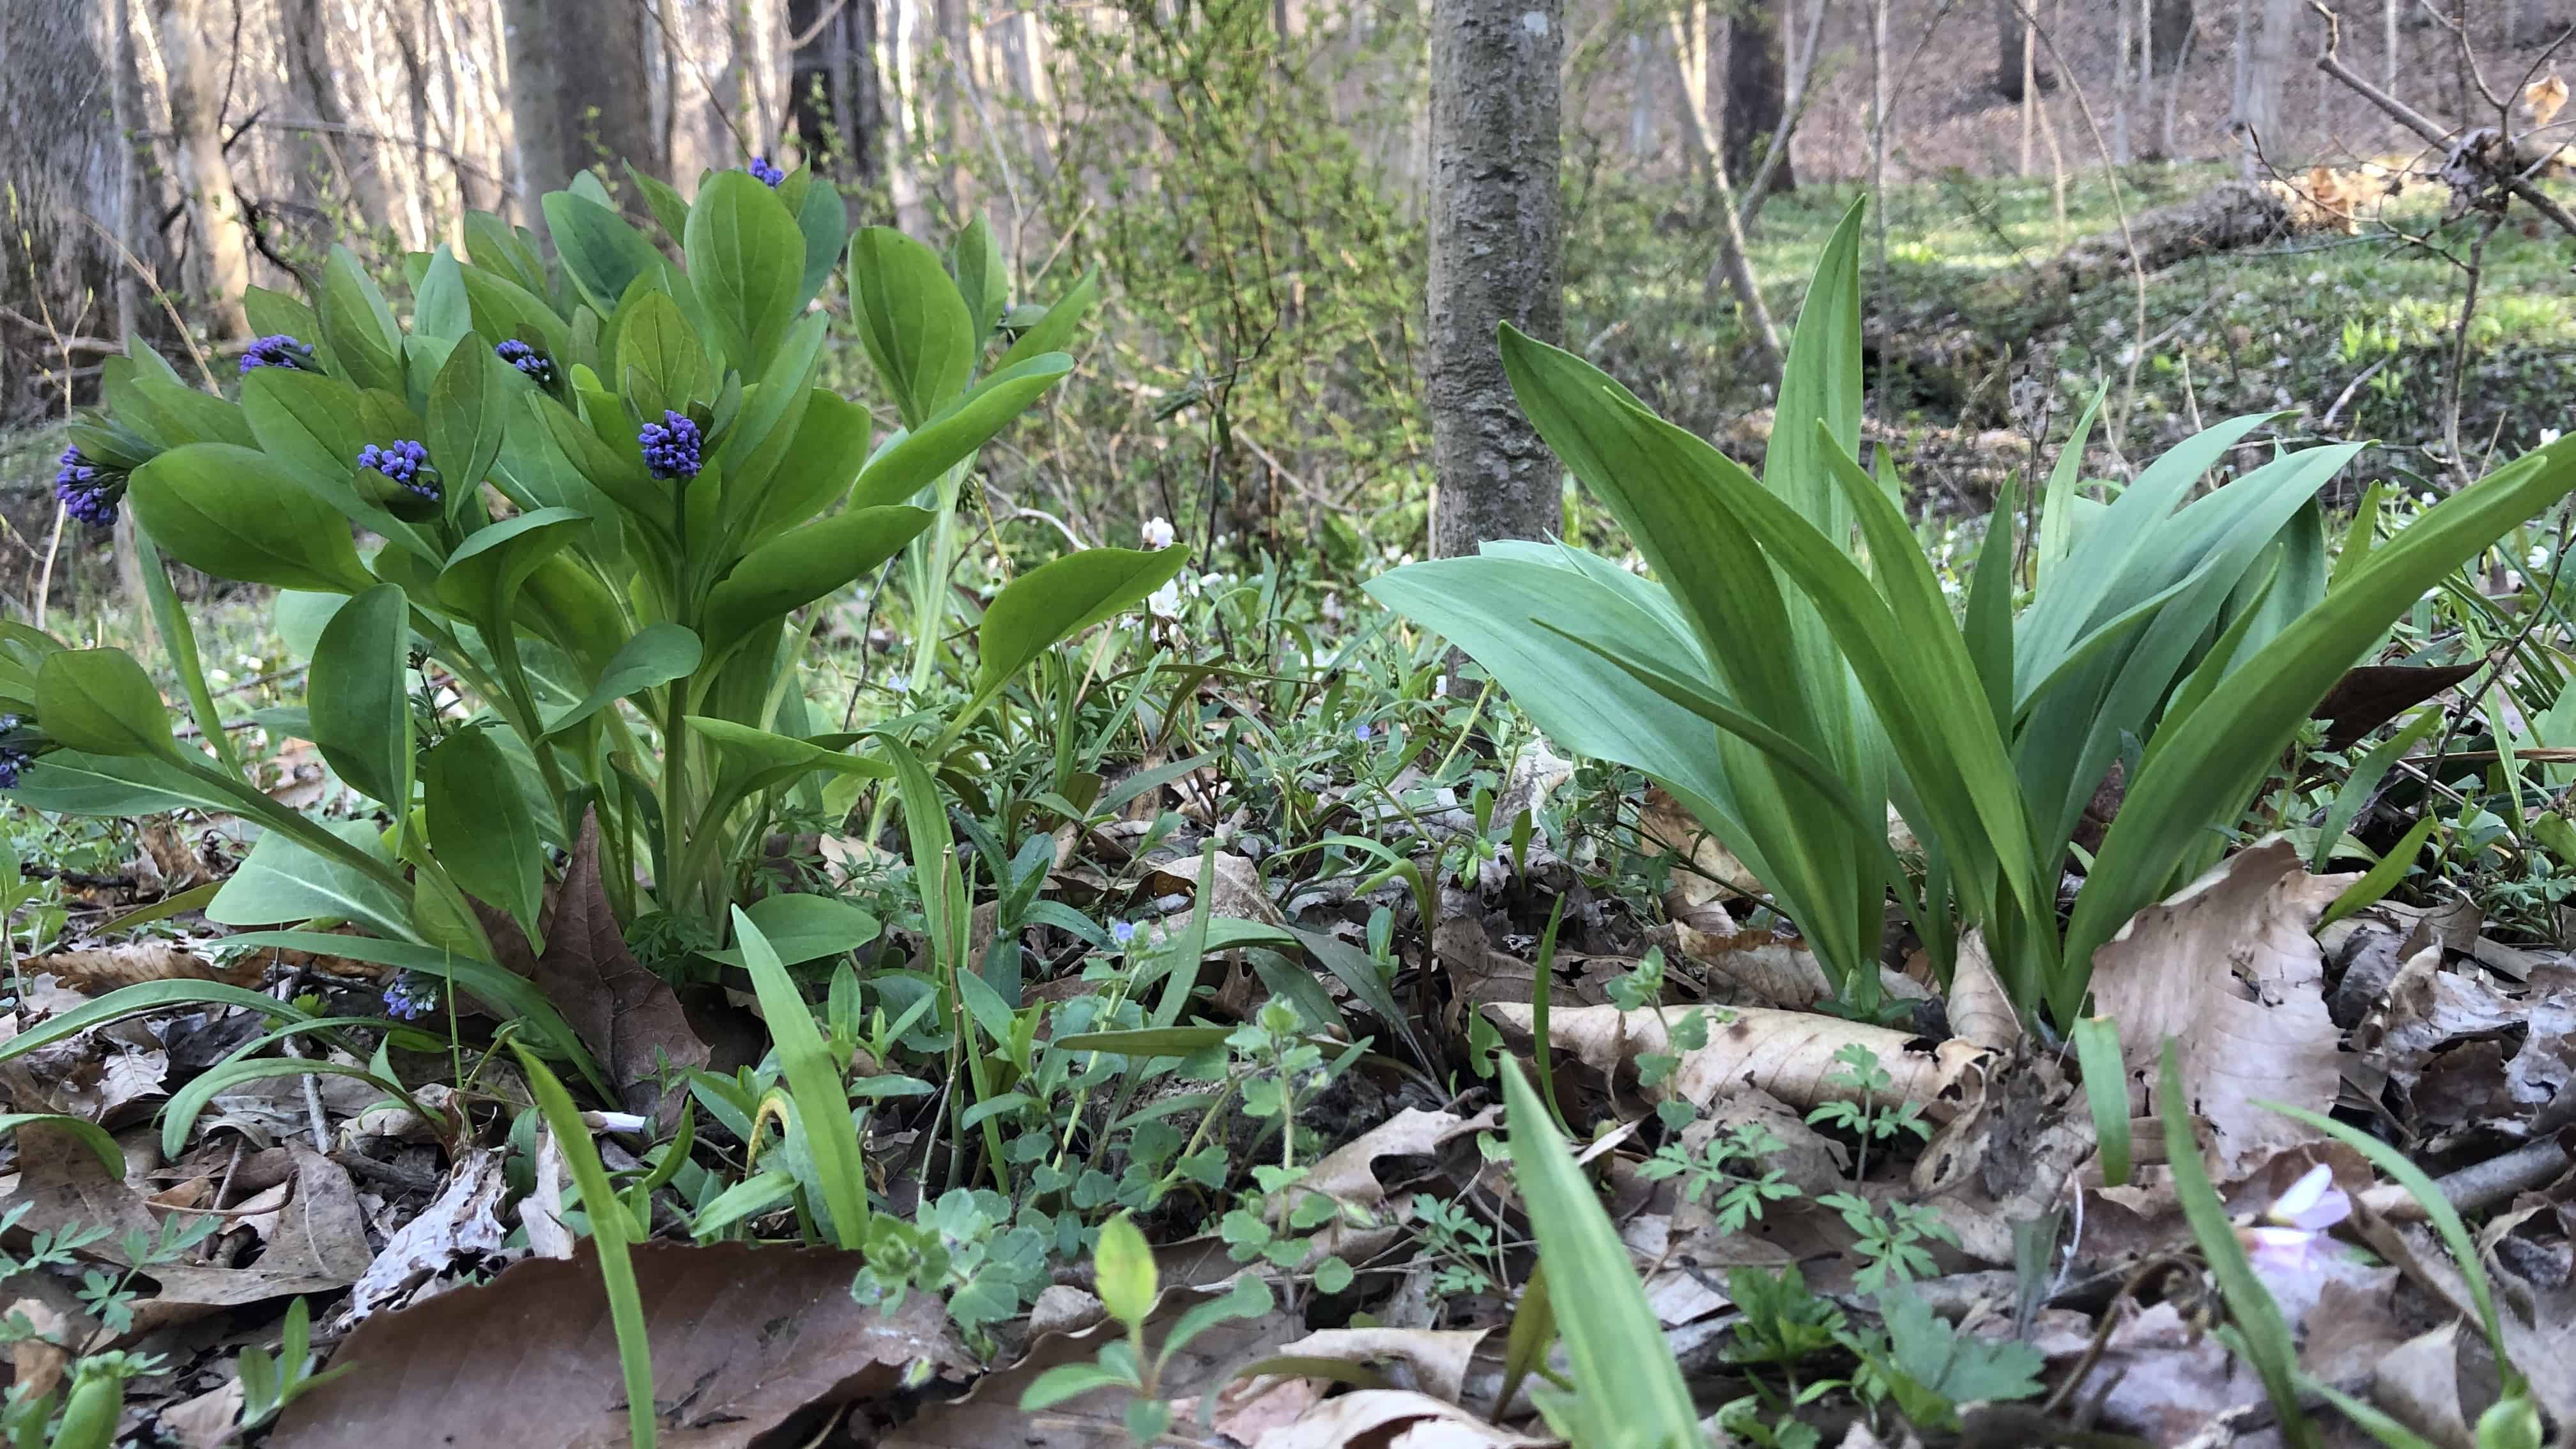 A ramp next to a Bluebell.